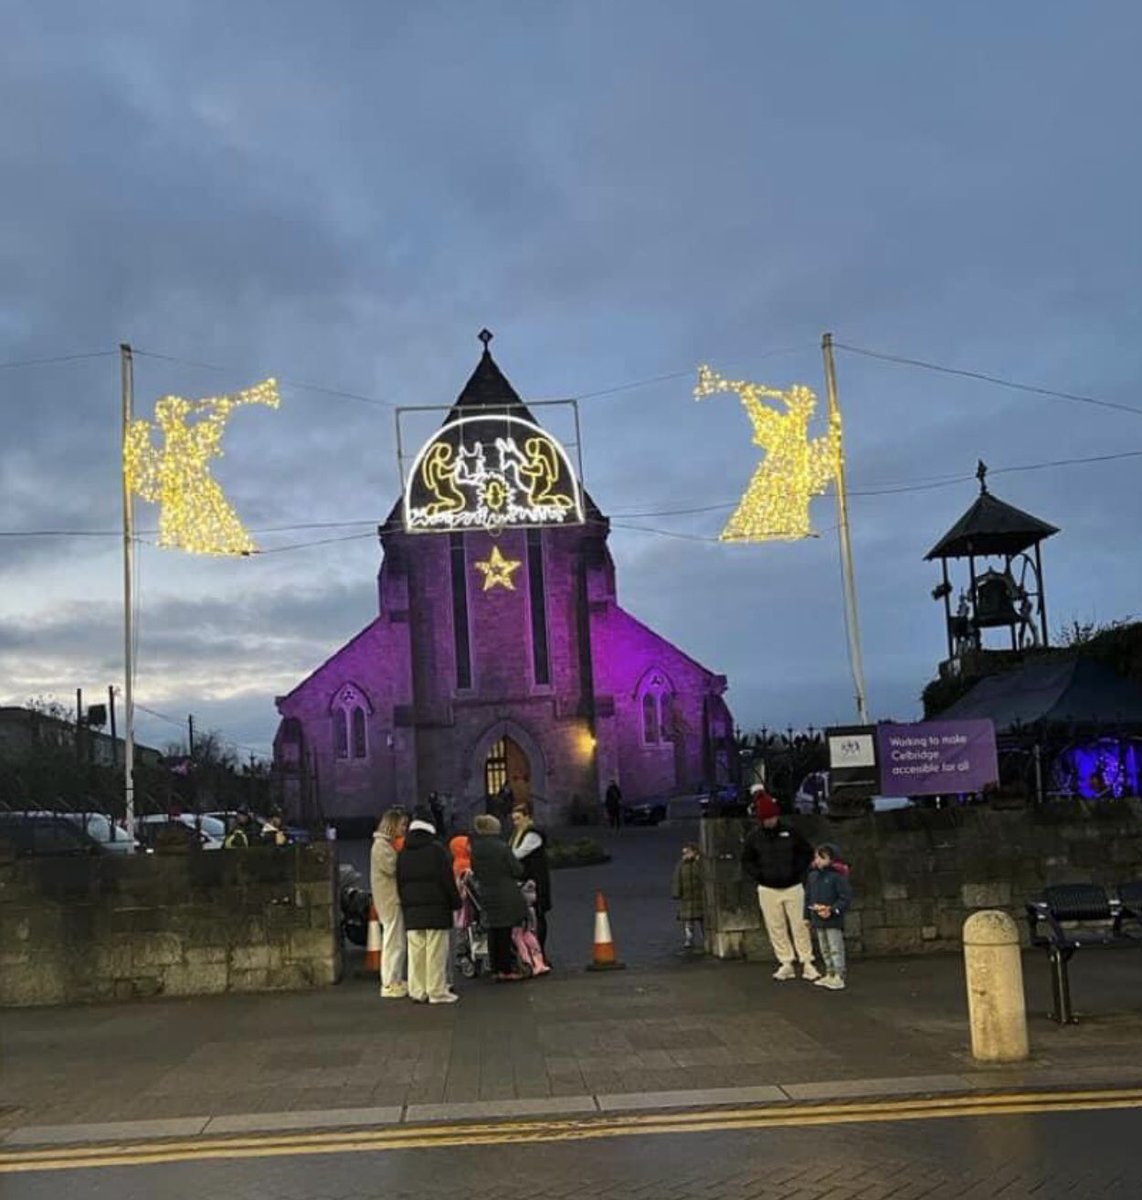 It is wonderful to see St Patrick’s Church , Celbridge turned purple to support International Day of Persons with Disabilities and Kildare Disability Week. Many thanks to Parish Priest, Father Joe McDonald. #IDPWD23 #PurpleLights23 #KildareDisabilityWeek #community #Inclusion